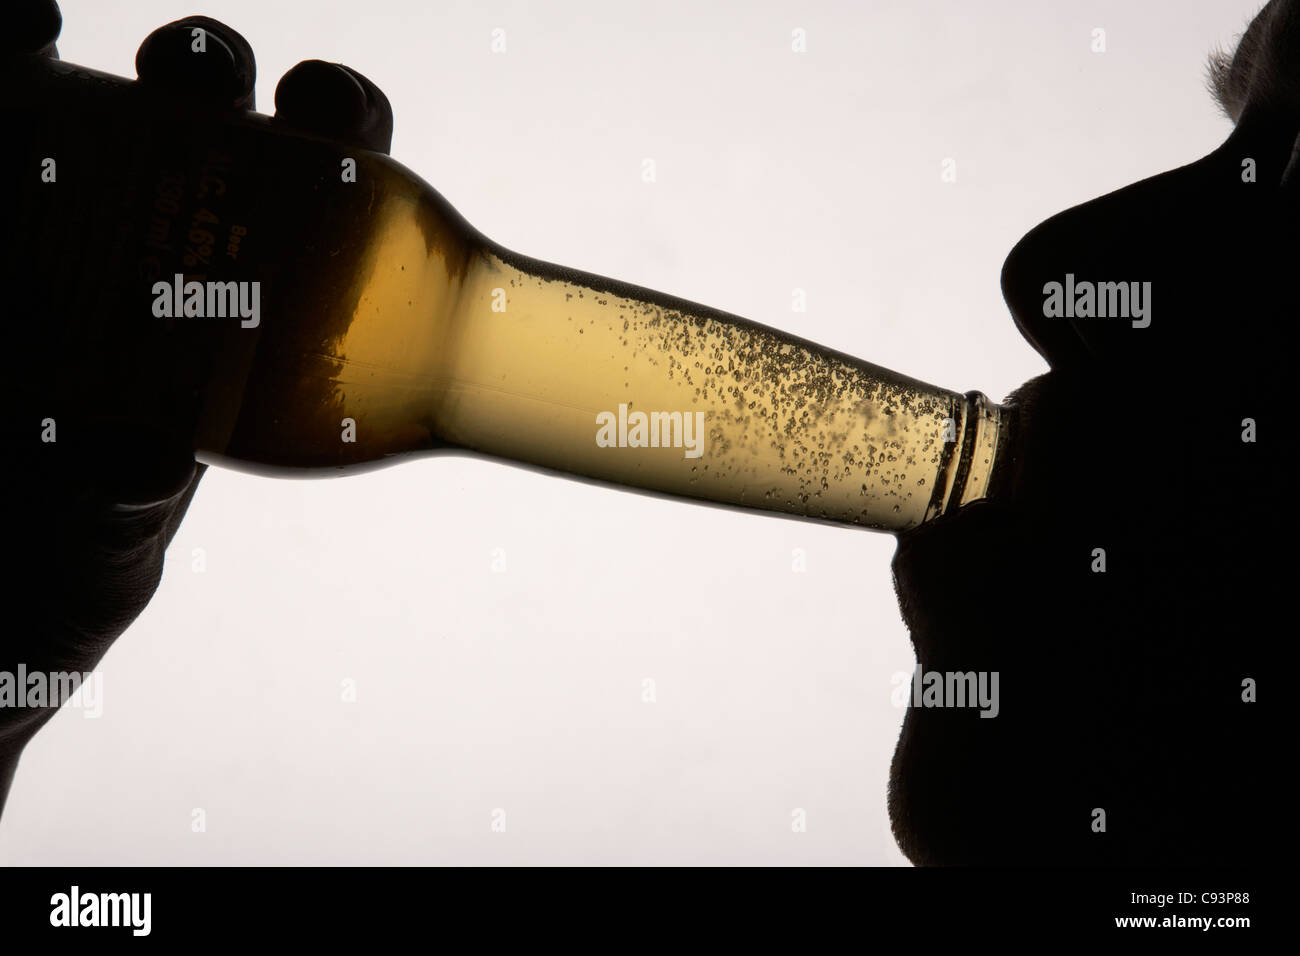 Silhouette man drinking beer Banque D'Images